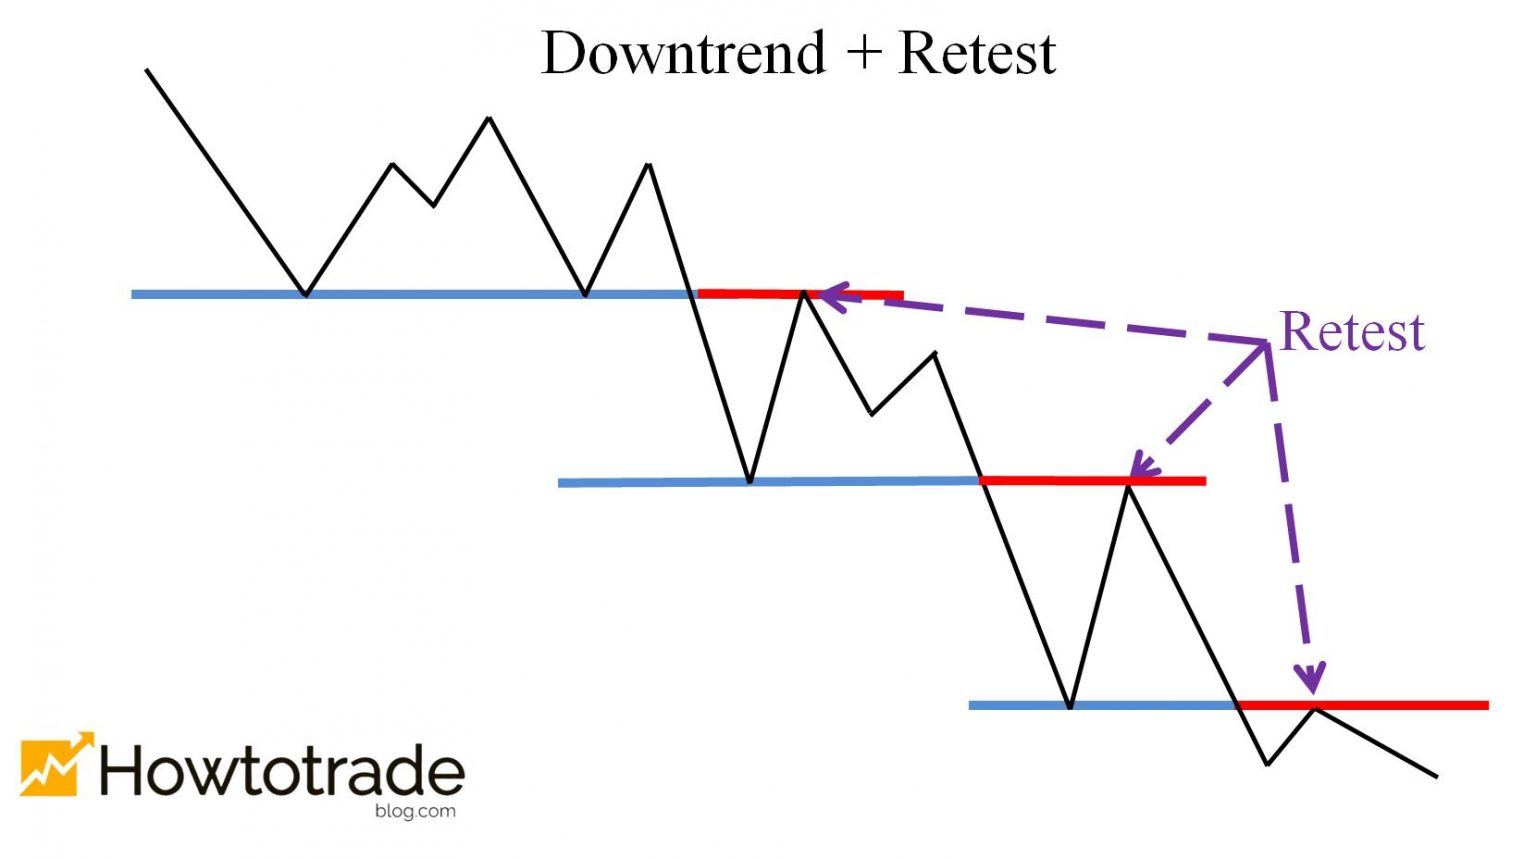 The price breaks the bottoms in a downtrend and retests